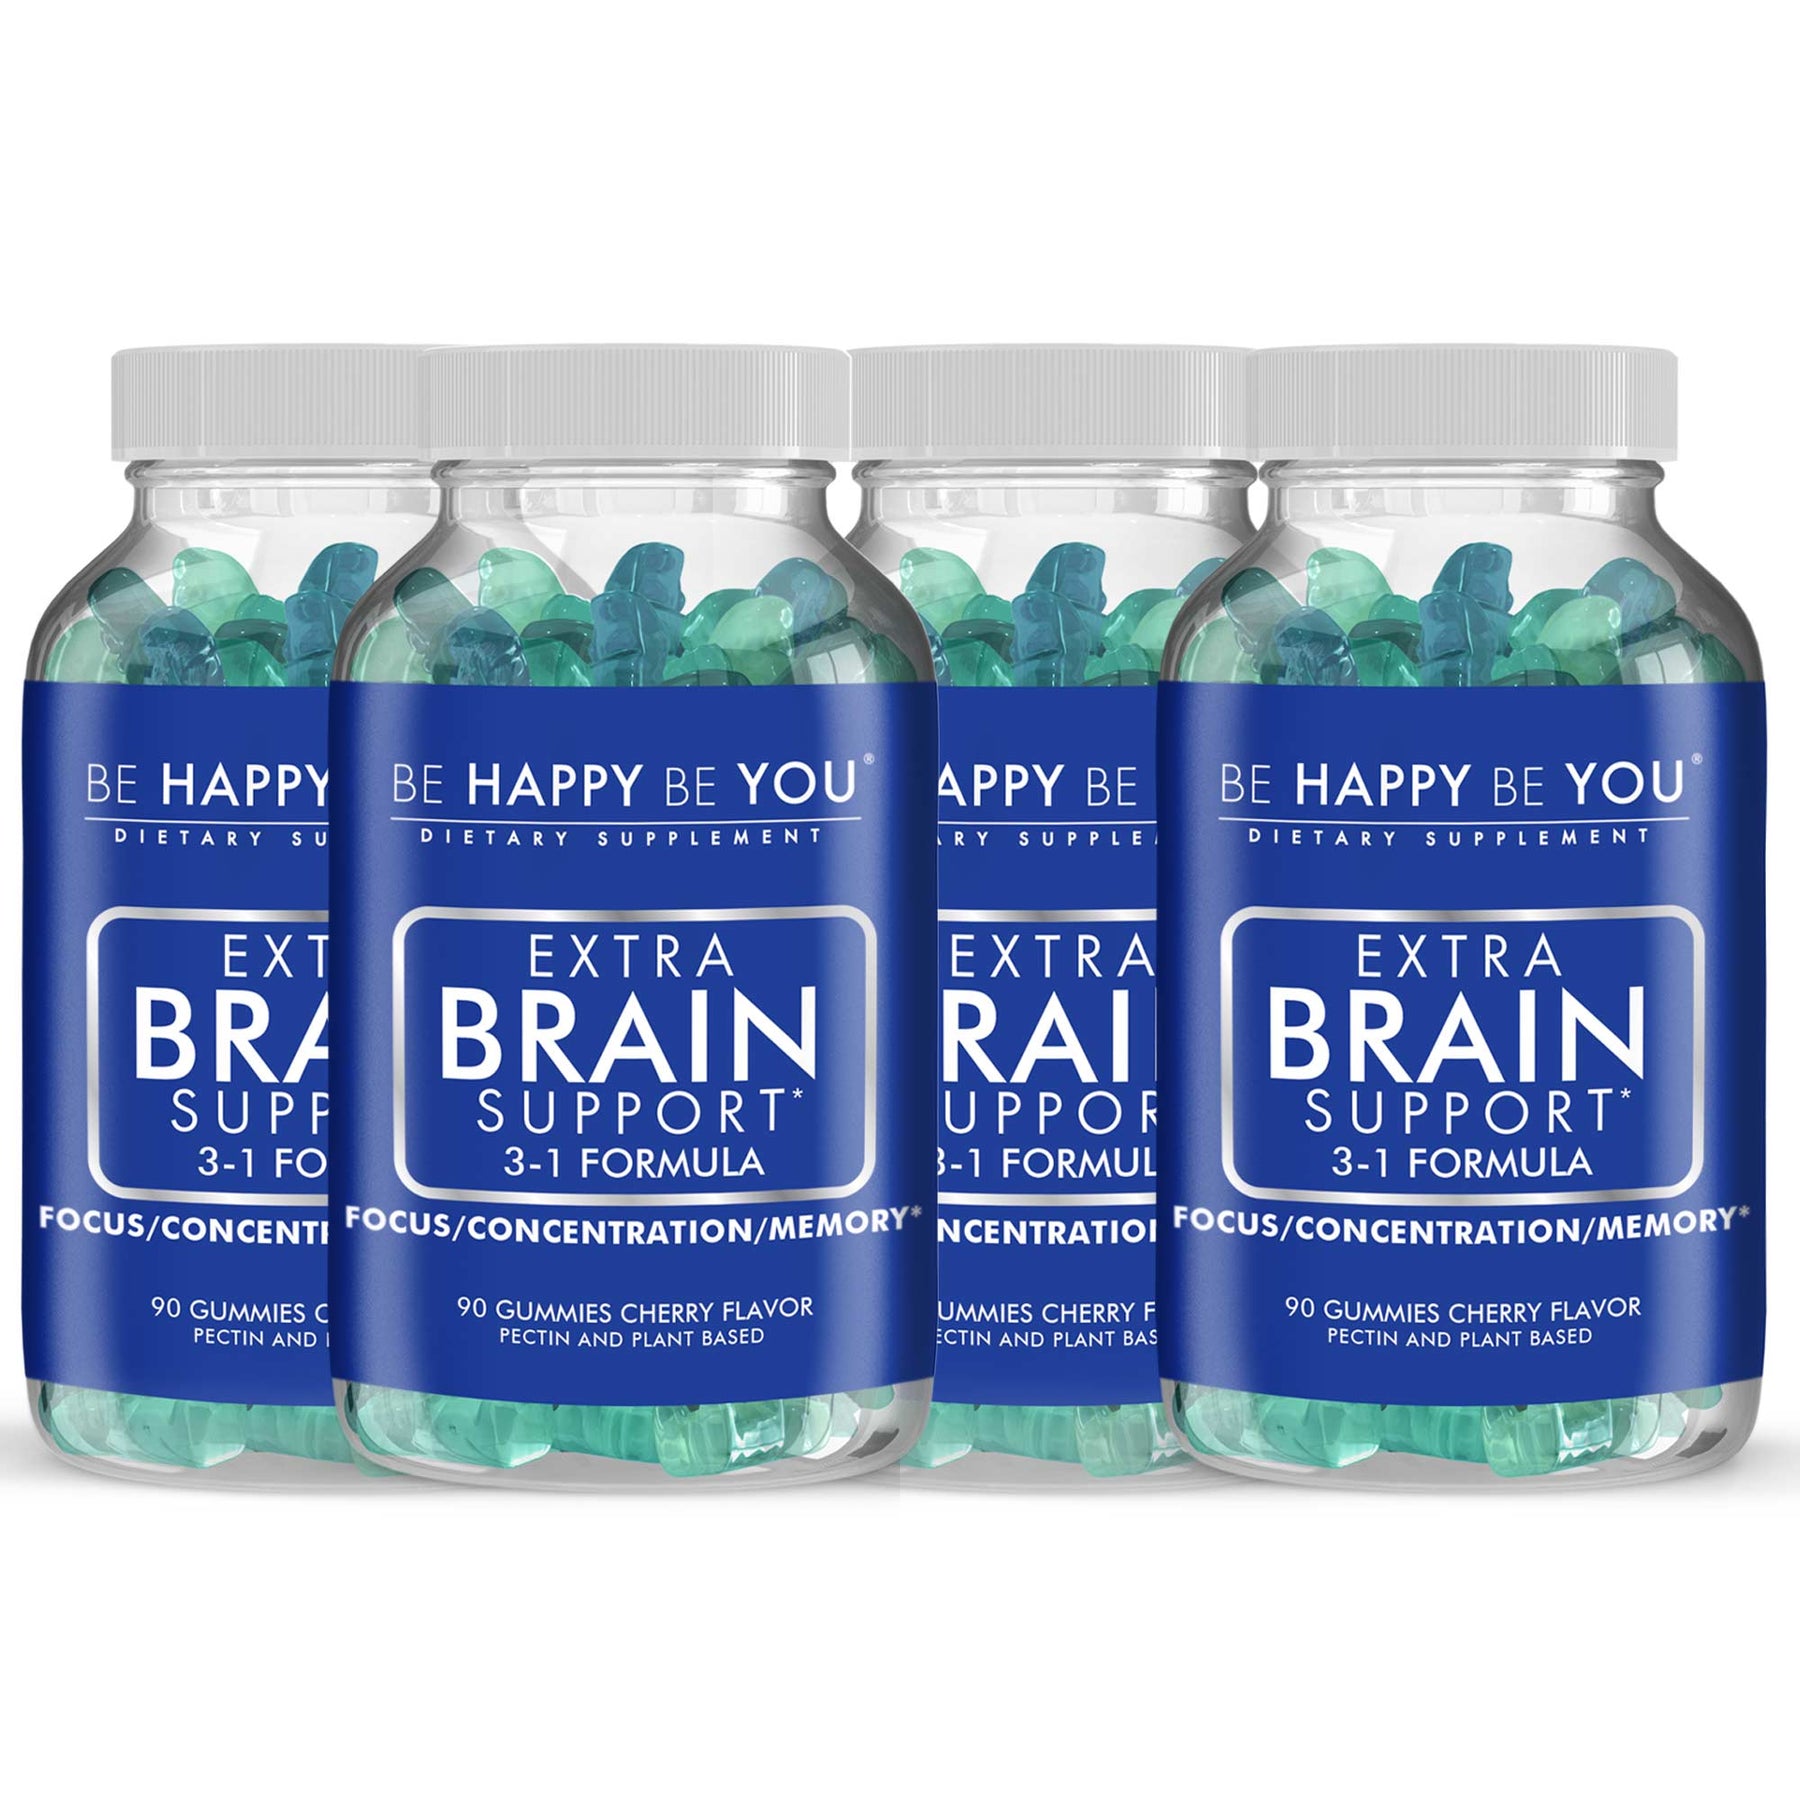 Extra Brain Support Gummy Vitamins – Be Happy Be You Gummy Vitamins